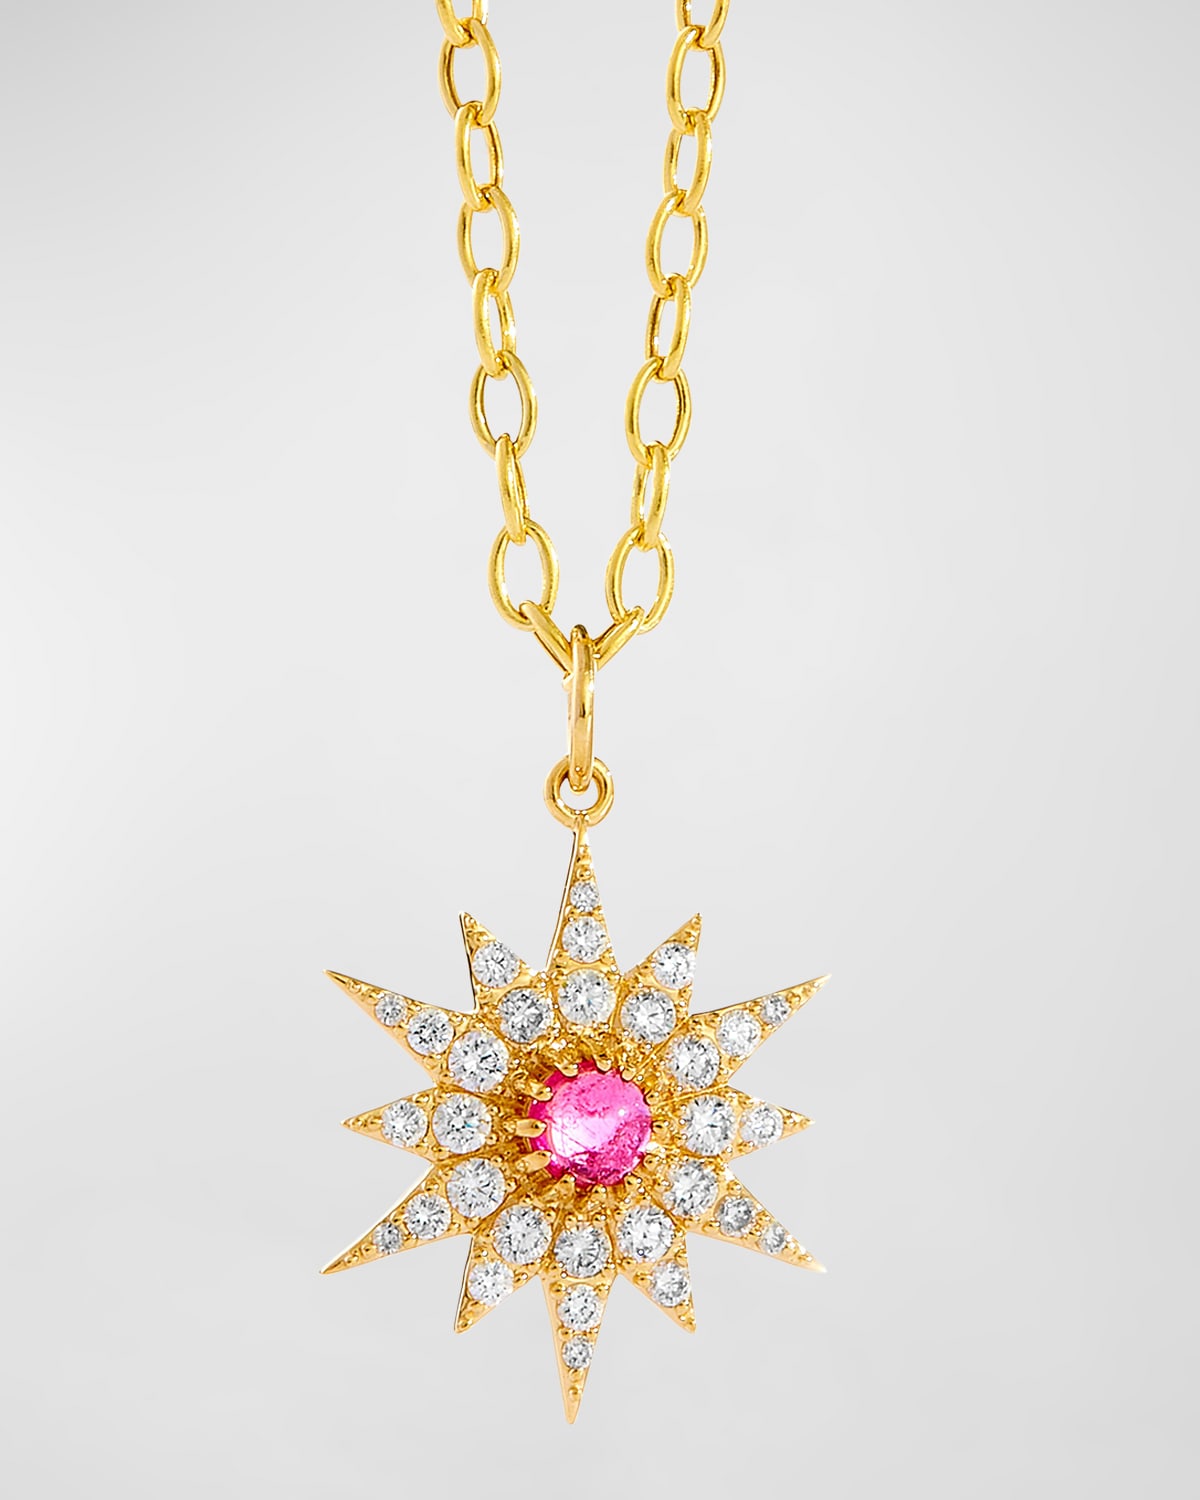 Syna 18k Yellow Gold Cosmic Starburst Pendant Necklace With Rubellite And Diamonds In Ruby